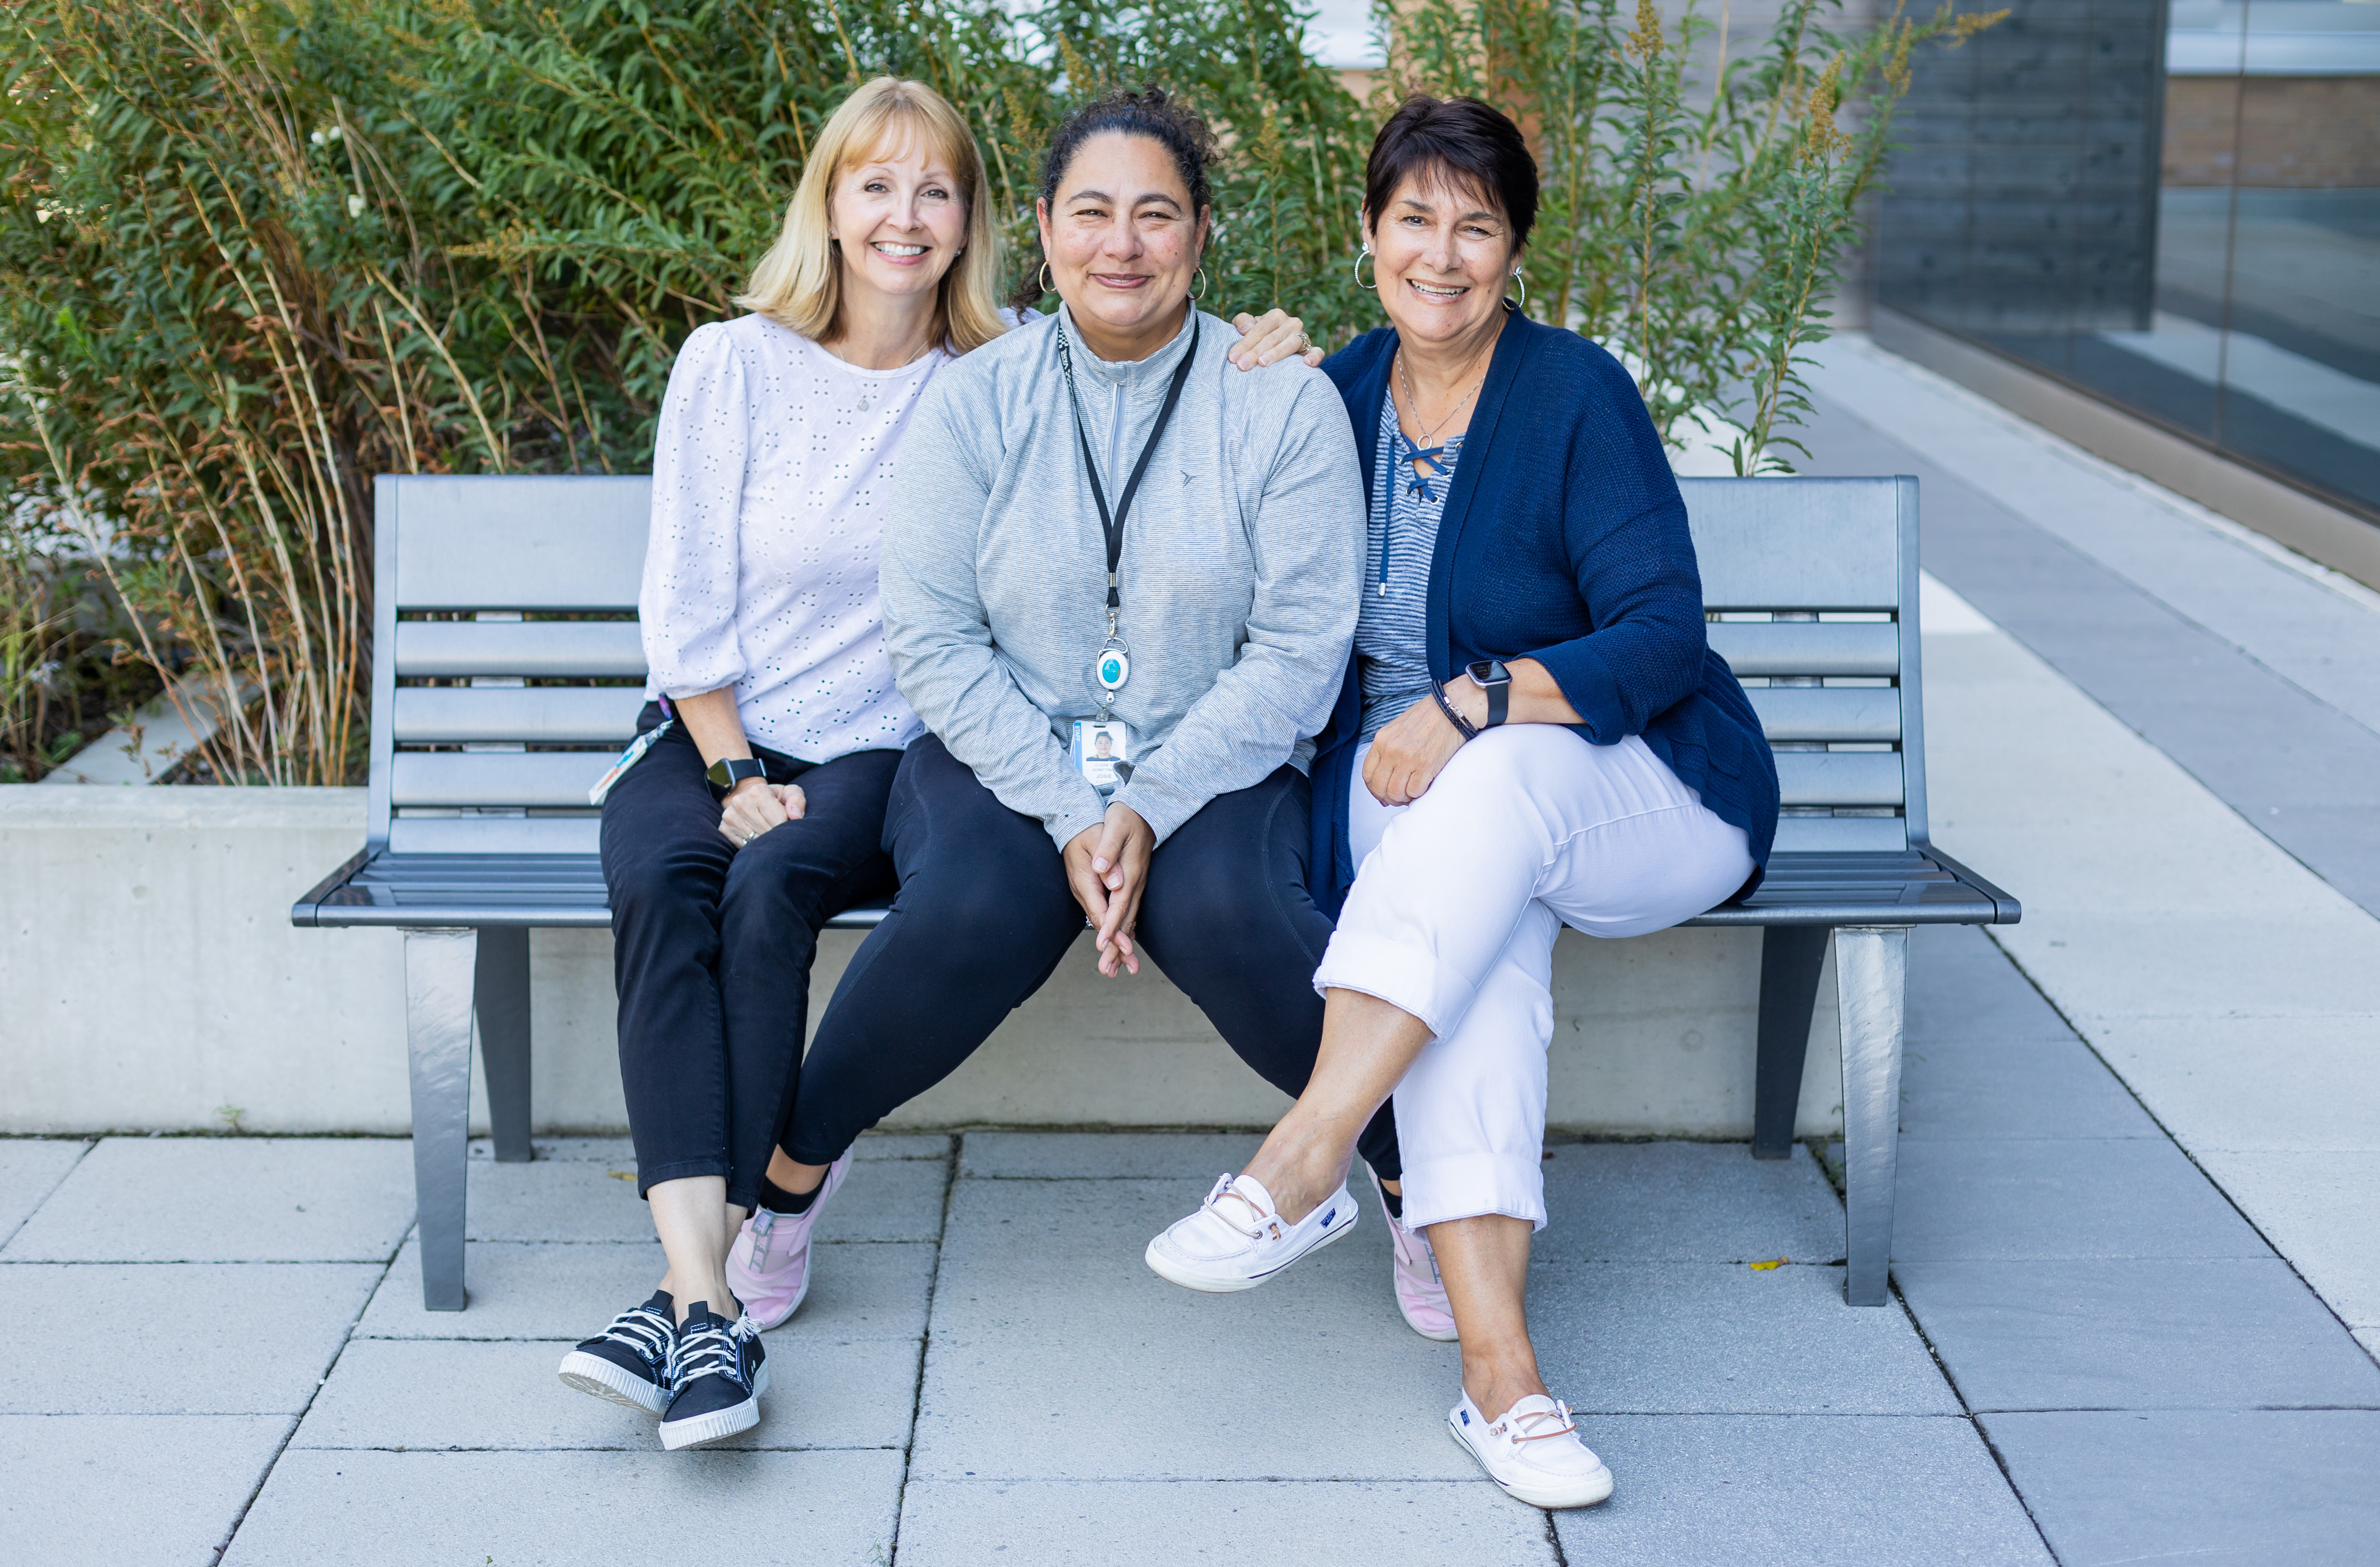 three women sitting on a bench smiling.